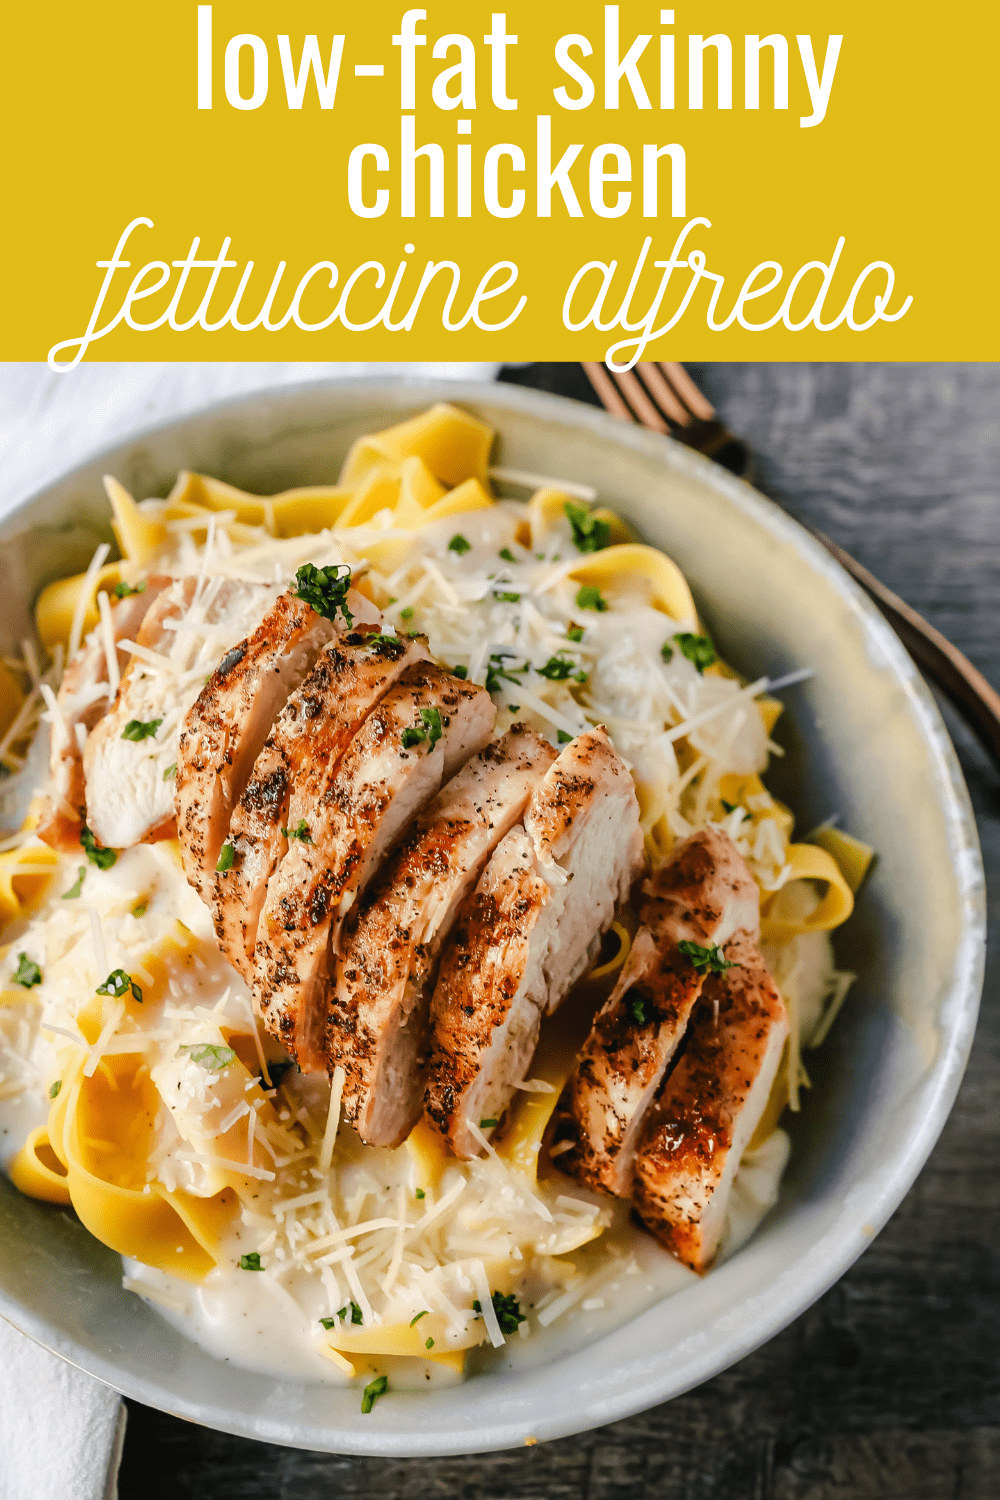 Skinny Low-Fat Chicken Fettuccine Alfredo All of the flavor of Chicken Fettuccine Alfredo without all of the fat and calories! Lean grilled chicken on top of low-fat alfredo sauce tossed with fettuccine noodles. www.modernhoney.com #lowfat #chicken #pasta 